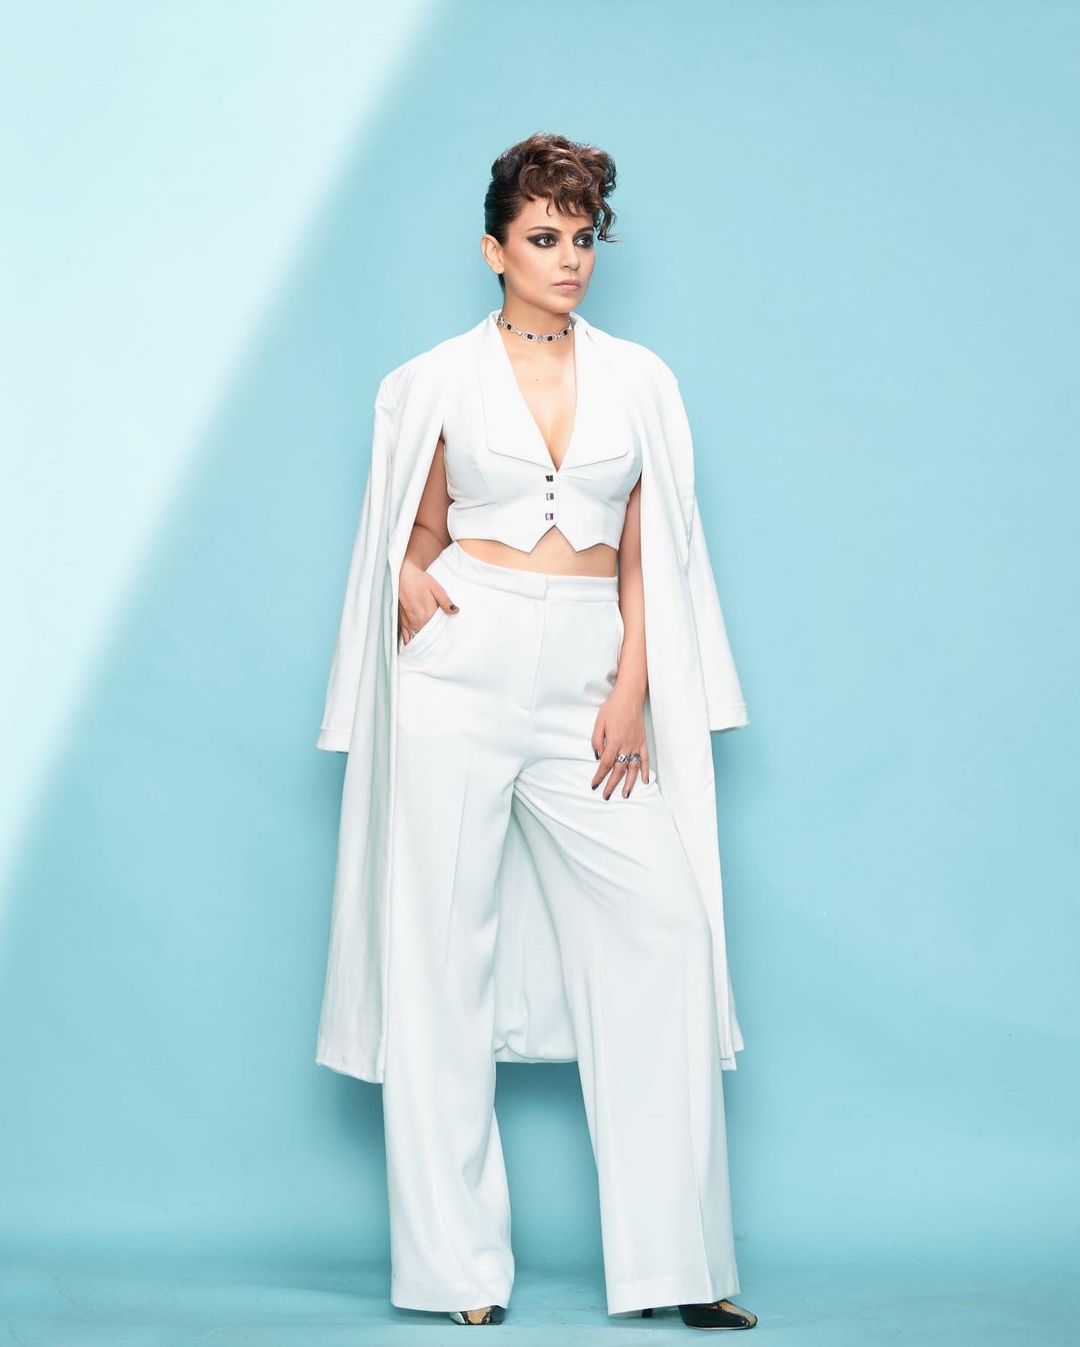 Kangana Ranaut looks uber chic in a three-piece white co-ords